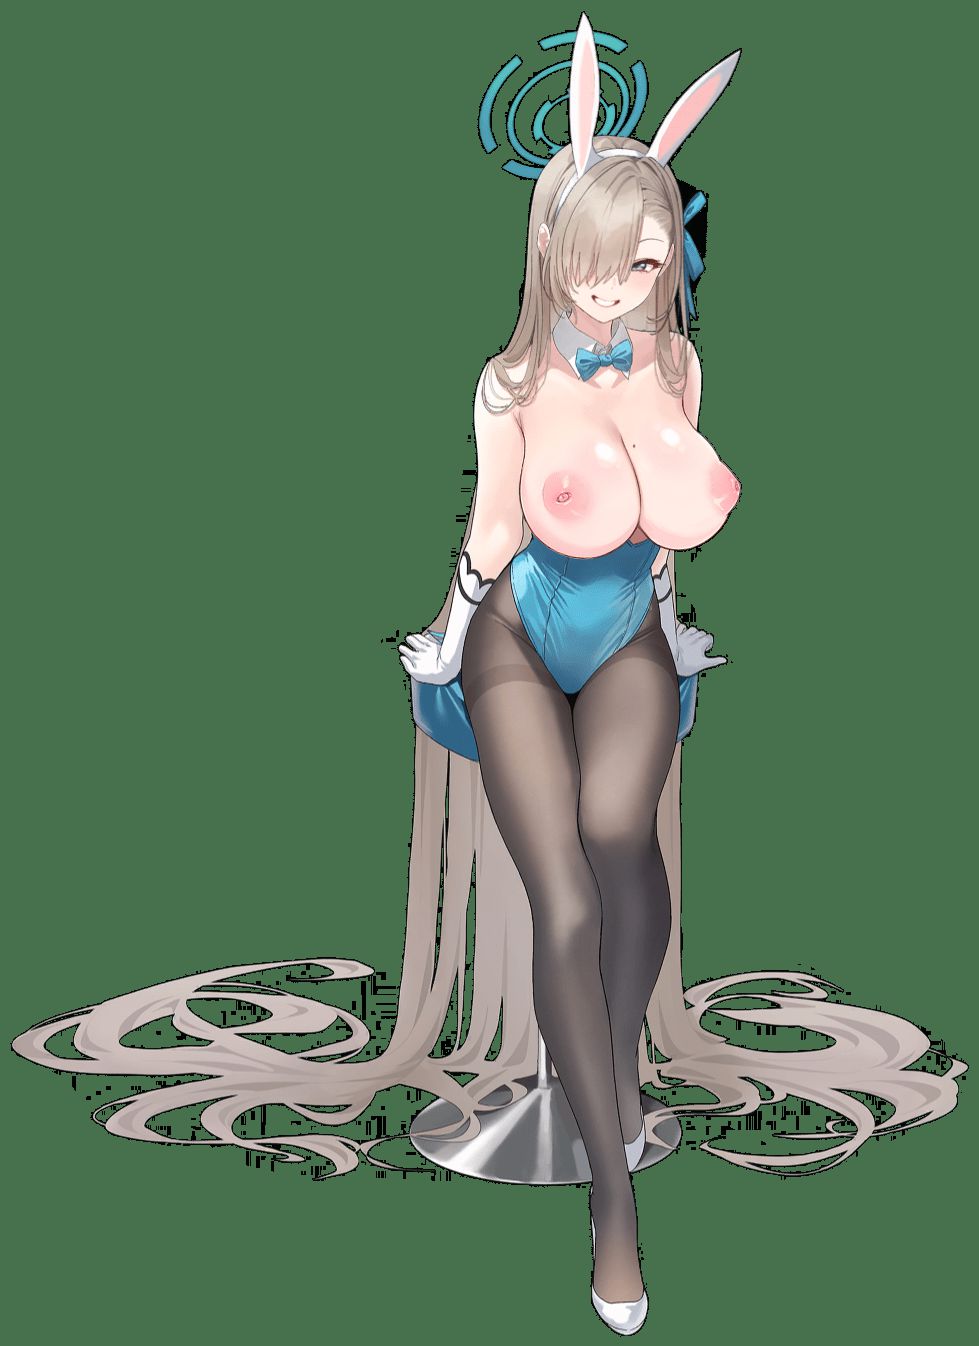 【Erocora Character Material】PNG background transparent erotic image such as anime characters Part 396 30